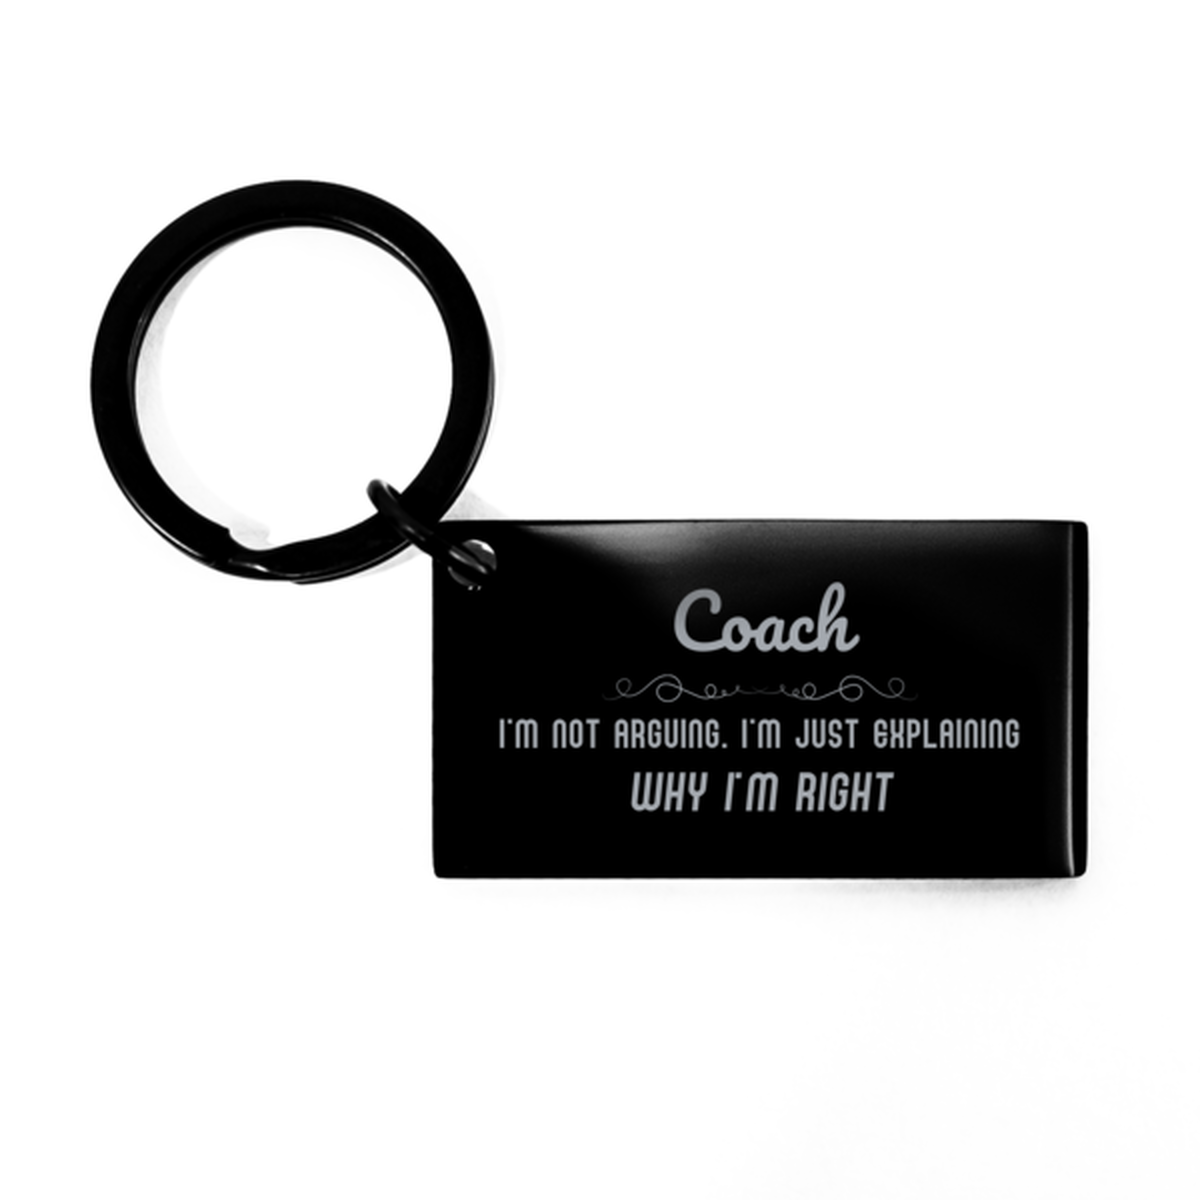 Coach I'm not Arguing. I'm Just Explaining Why I'm RIGHT Keychain, Funny Saying Quote Coach Gifts For Coach Graduation Birthday Christmas Gifts for Men Women Coworker